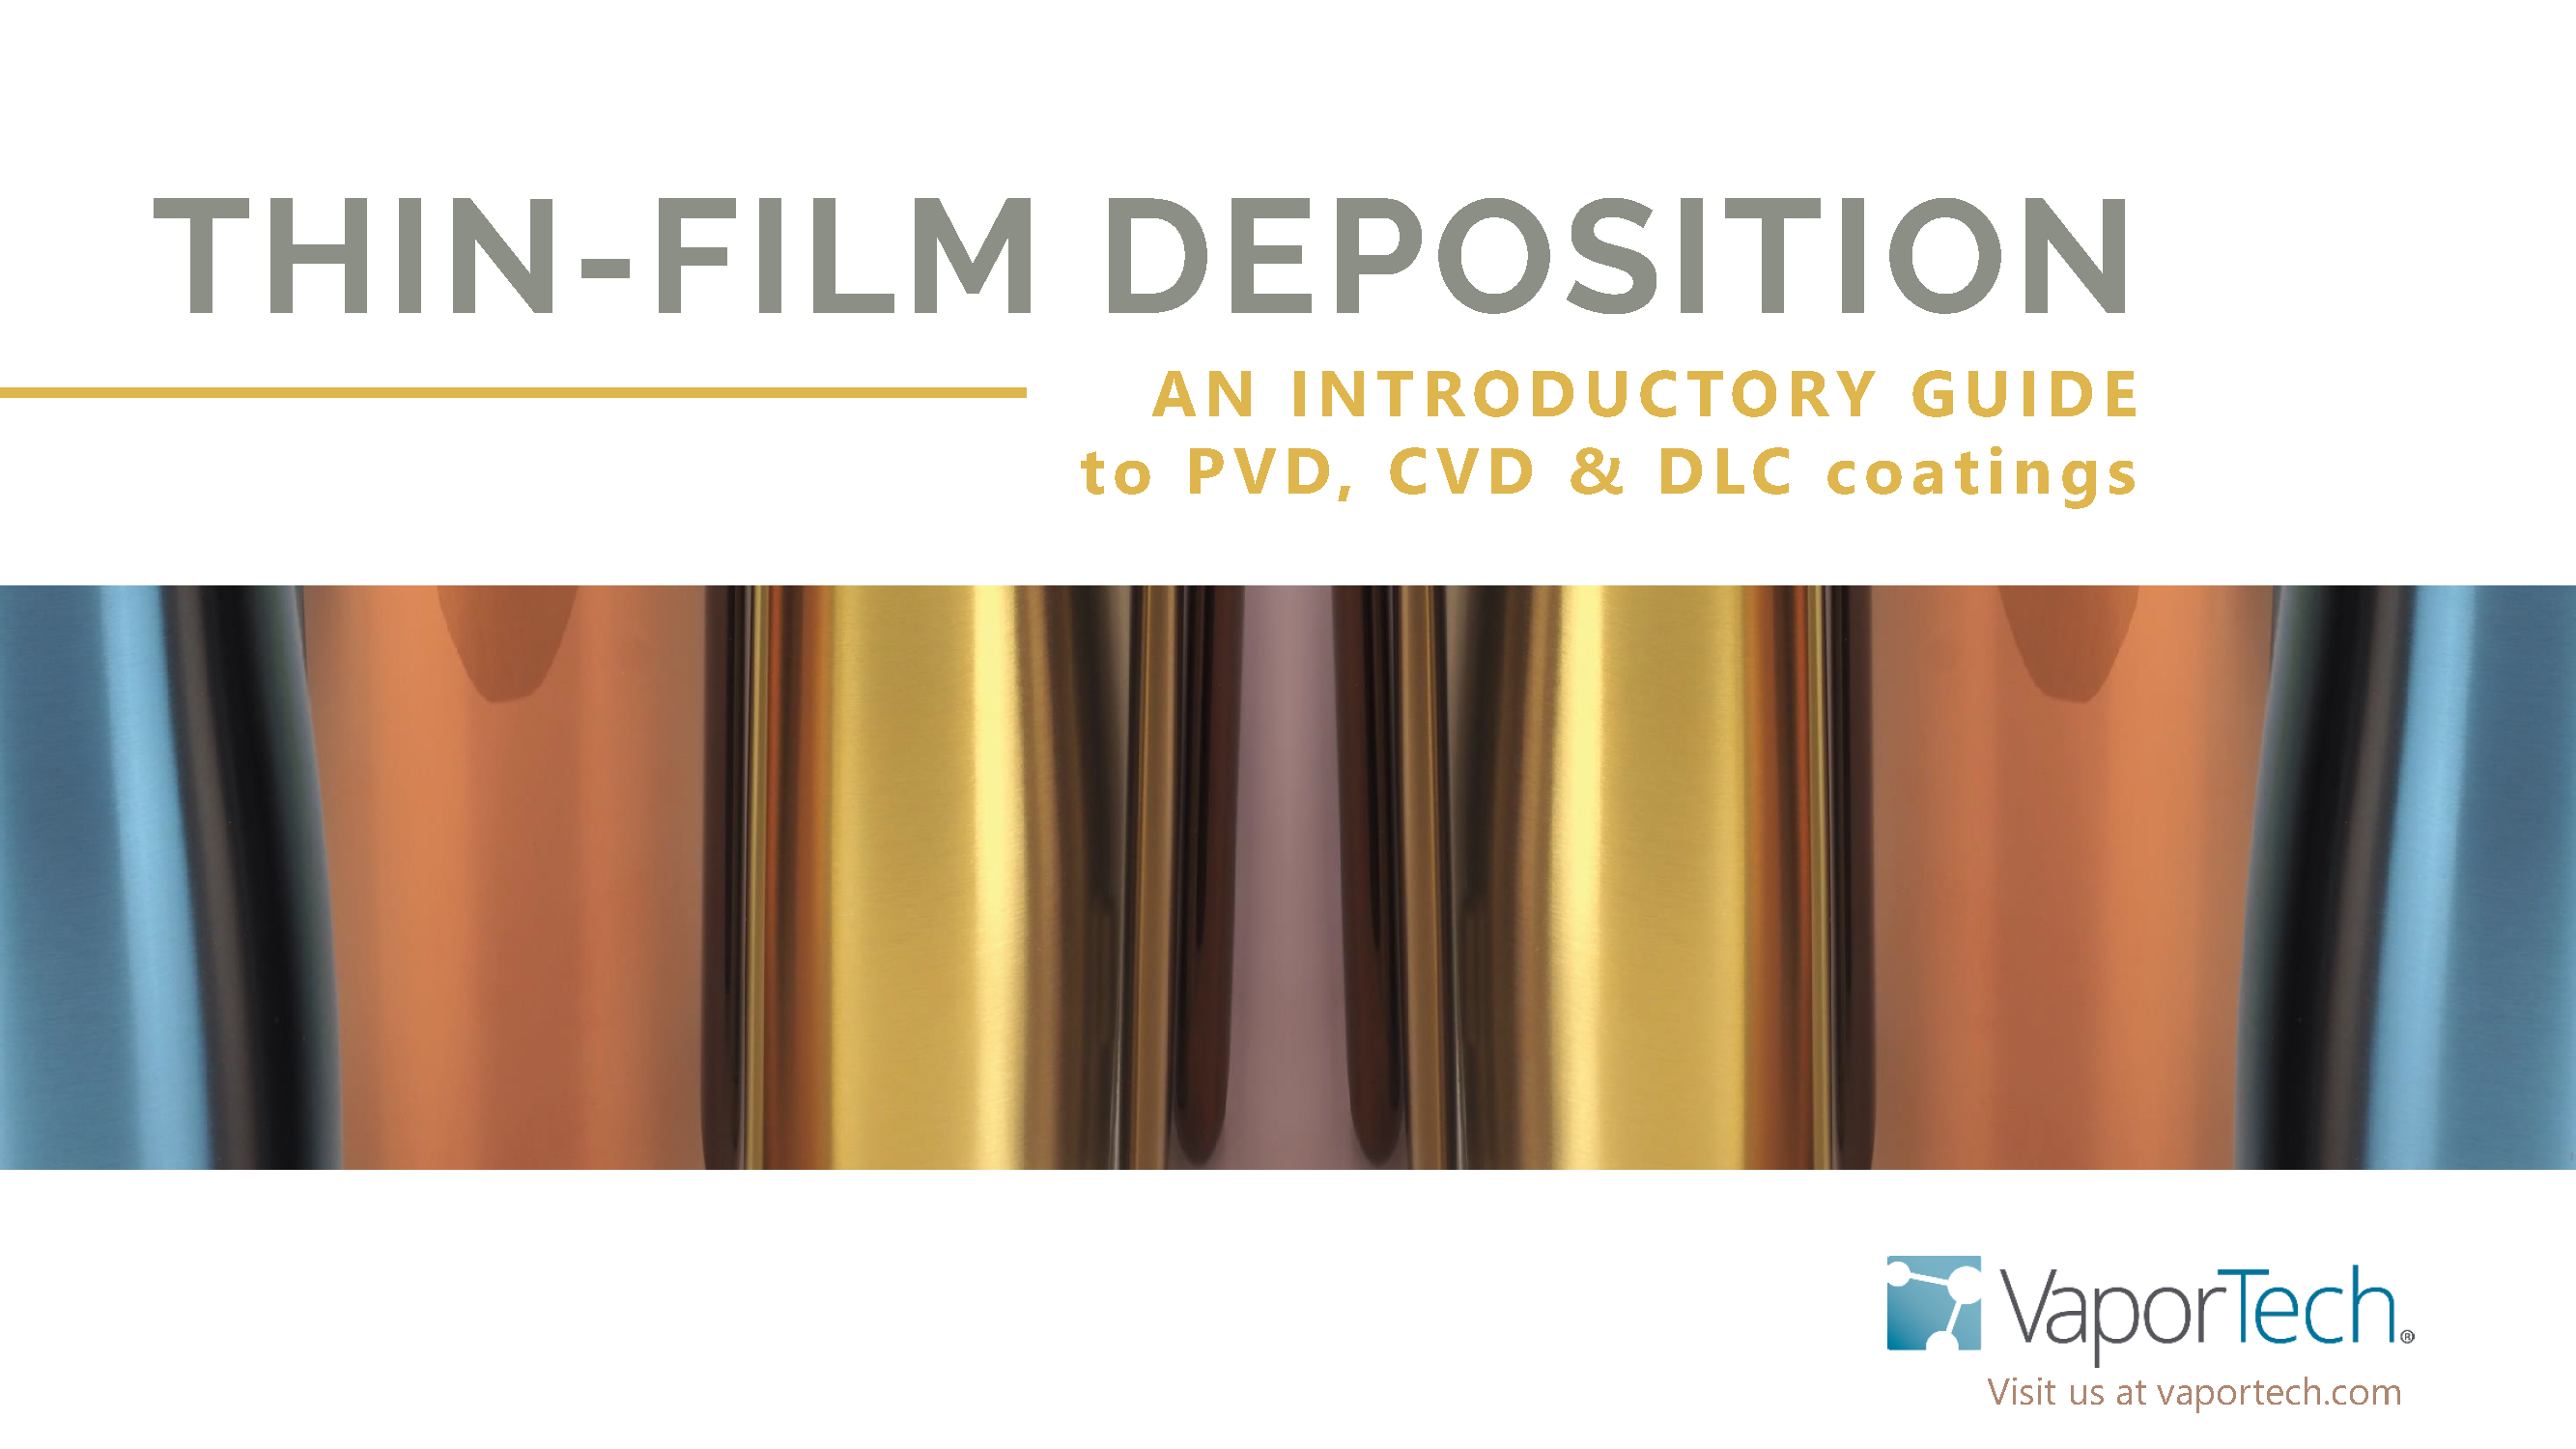 An Introductory Guide to PVD coating photo of cover